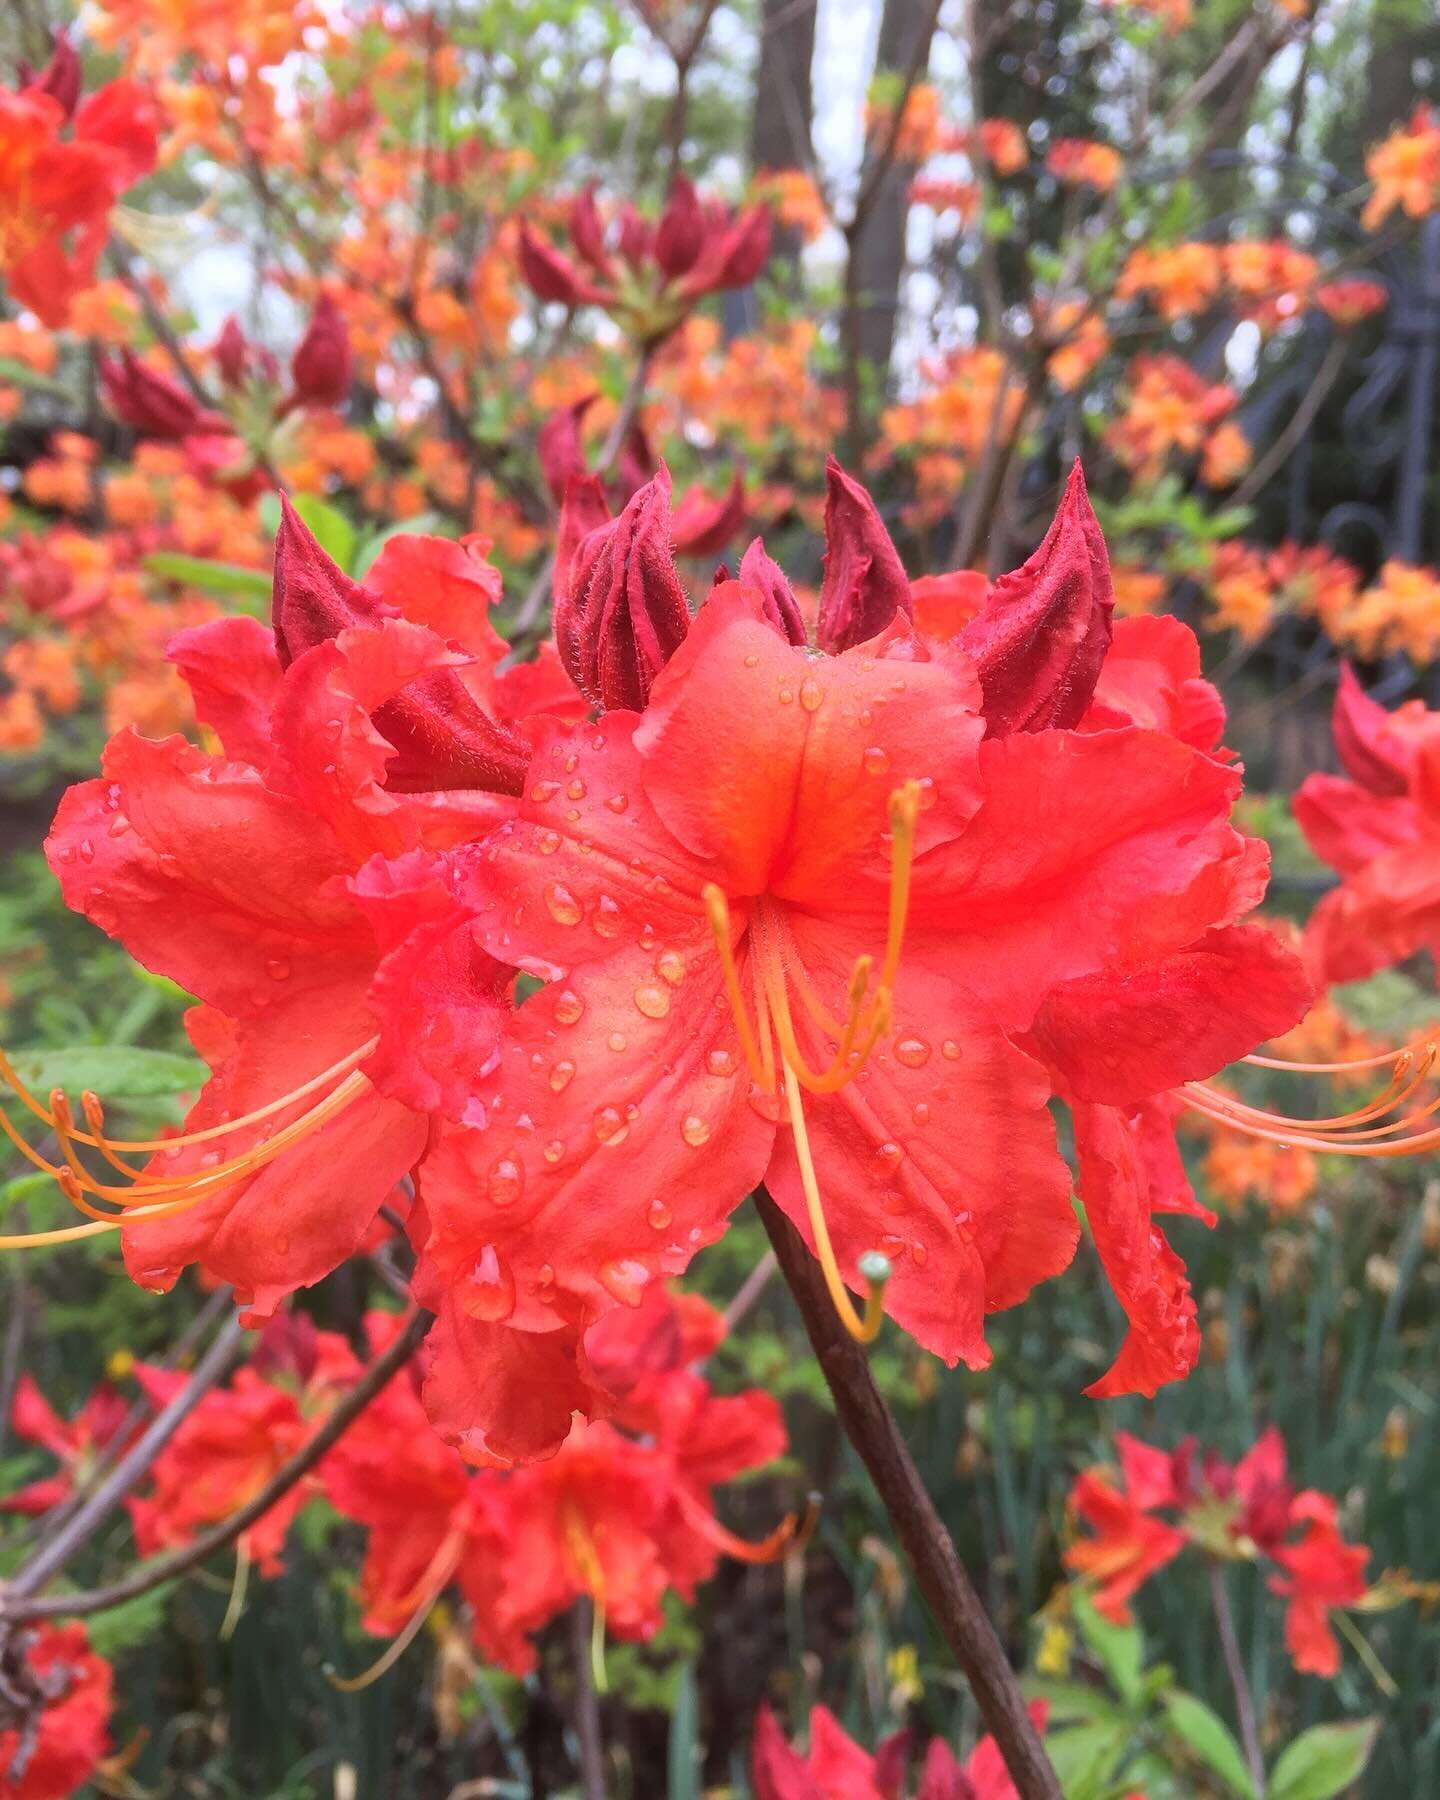 A stunning Florida Flame Azalea adding a pop of fiery color to our lunch! Nature&rsquo;s surprises make work breaks extra special! #ArborCare #TreeSpecialists #NatureAtWork #FloridaFlameAzalea